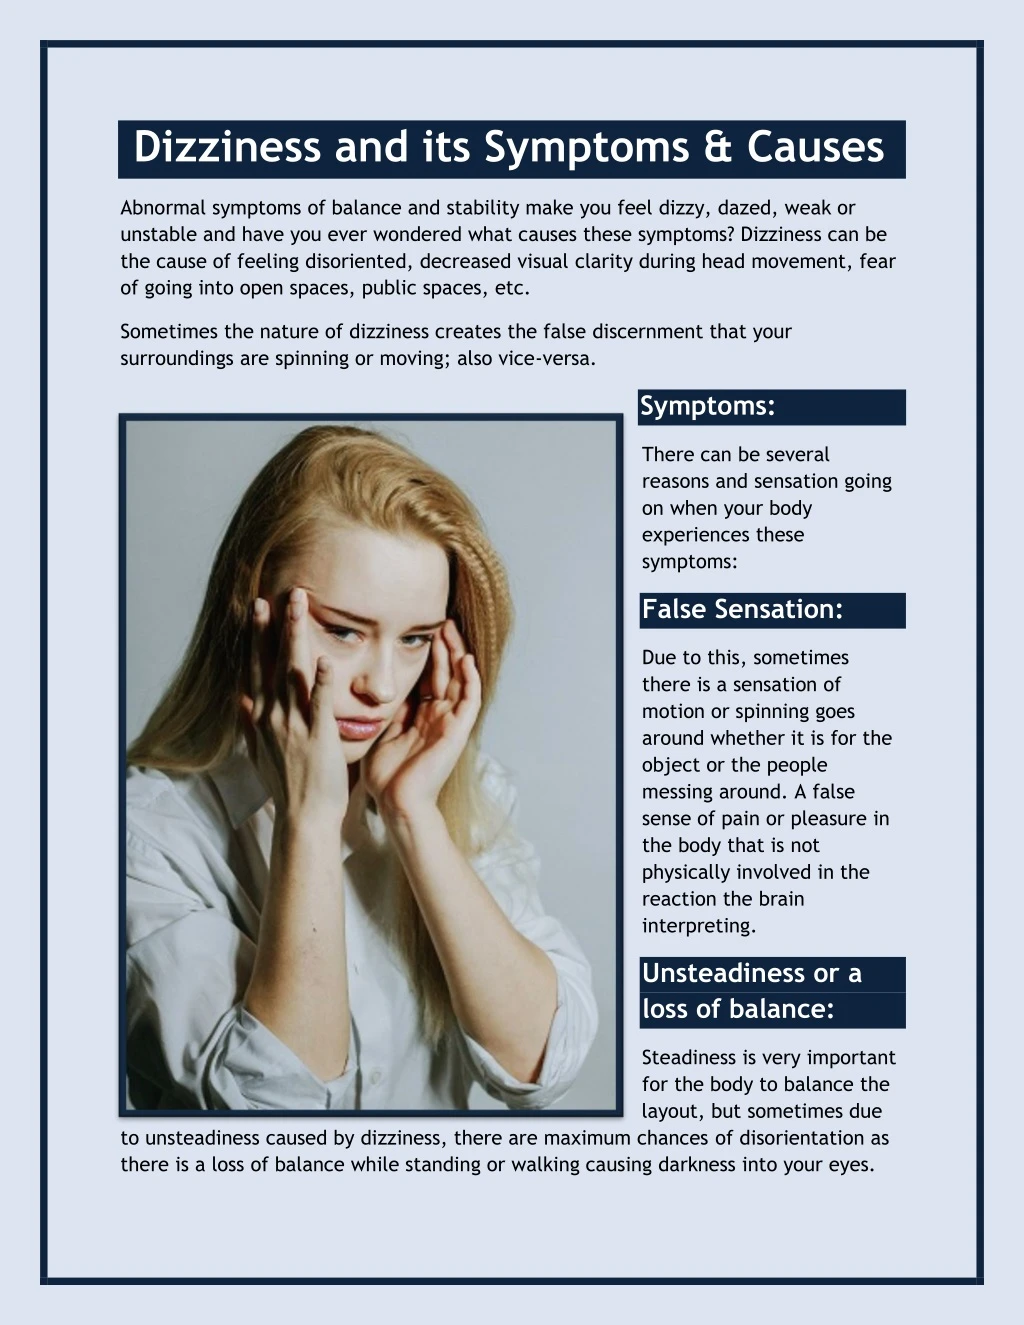 dizziness and its symptoms causes